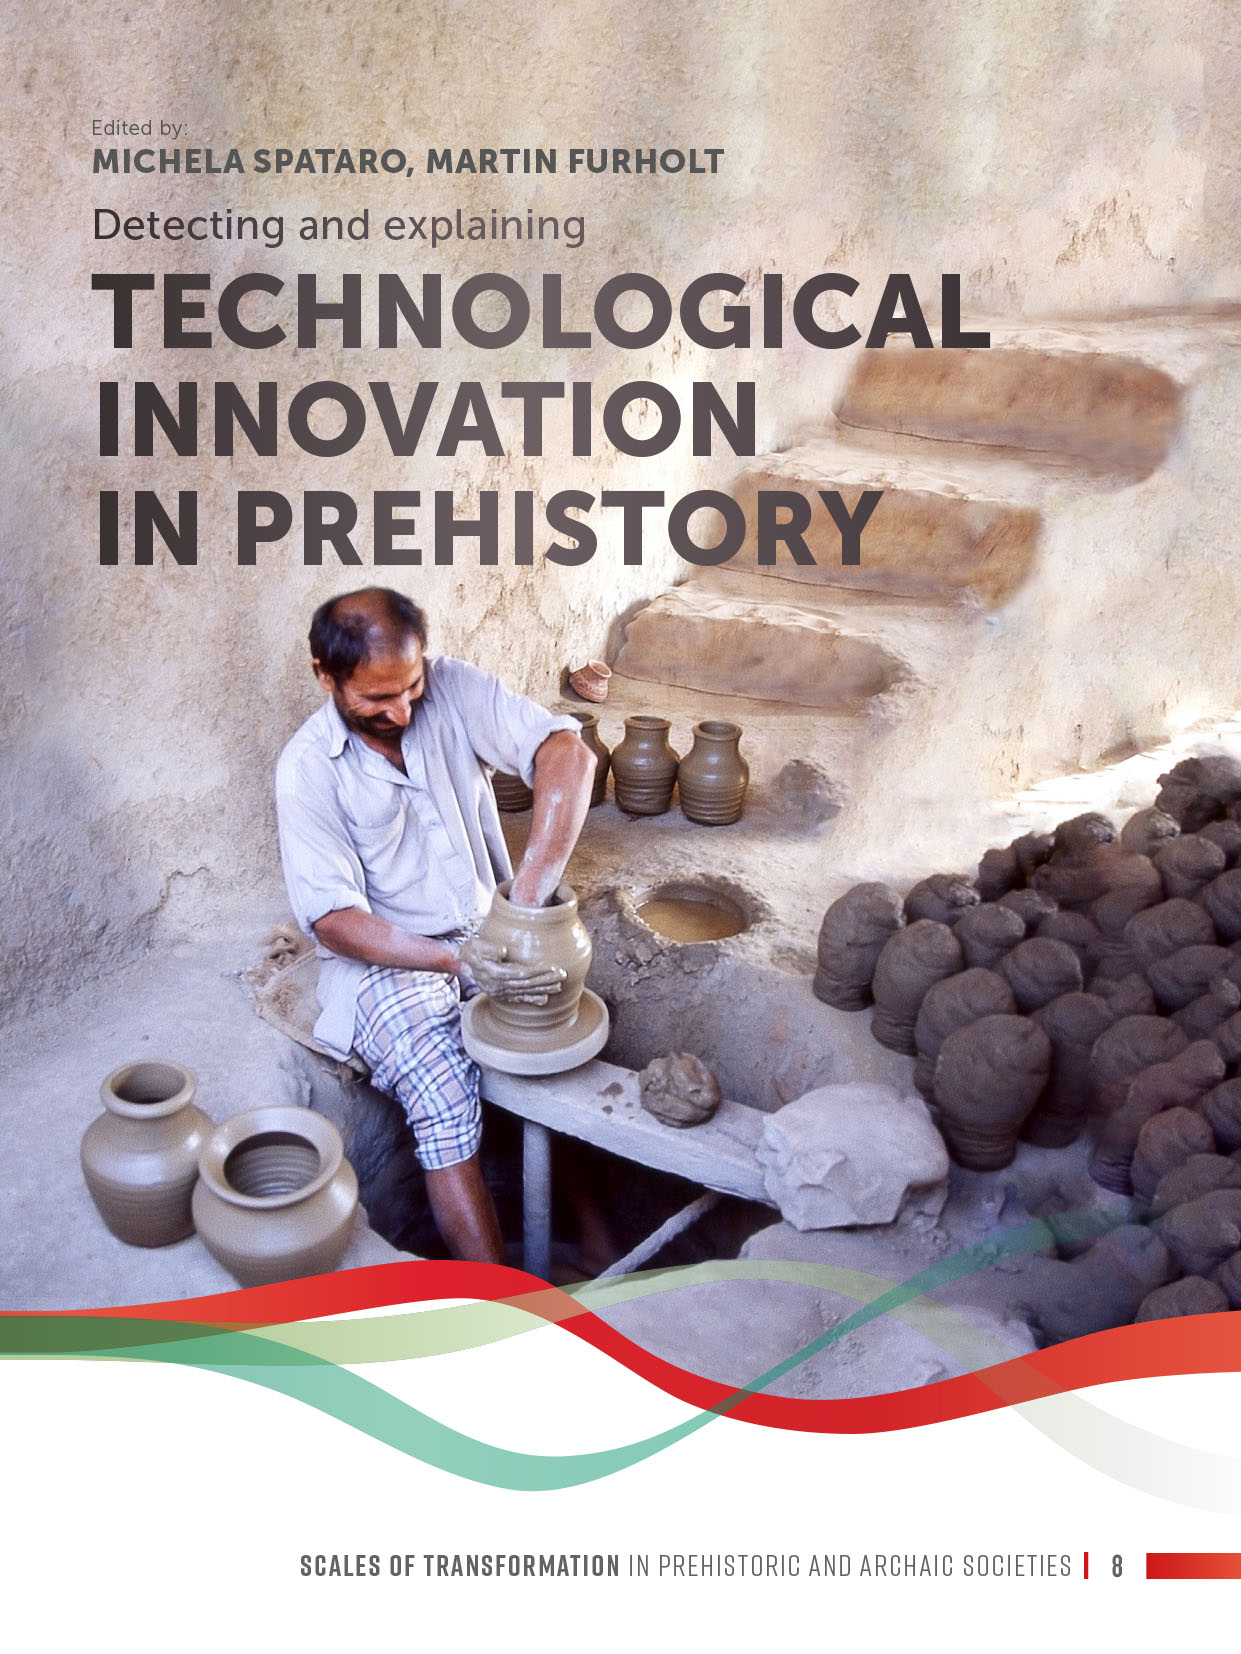 Detecting and explaining technological innovation in prehistory, 2020, 248 p.